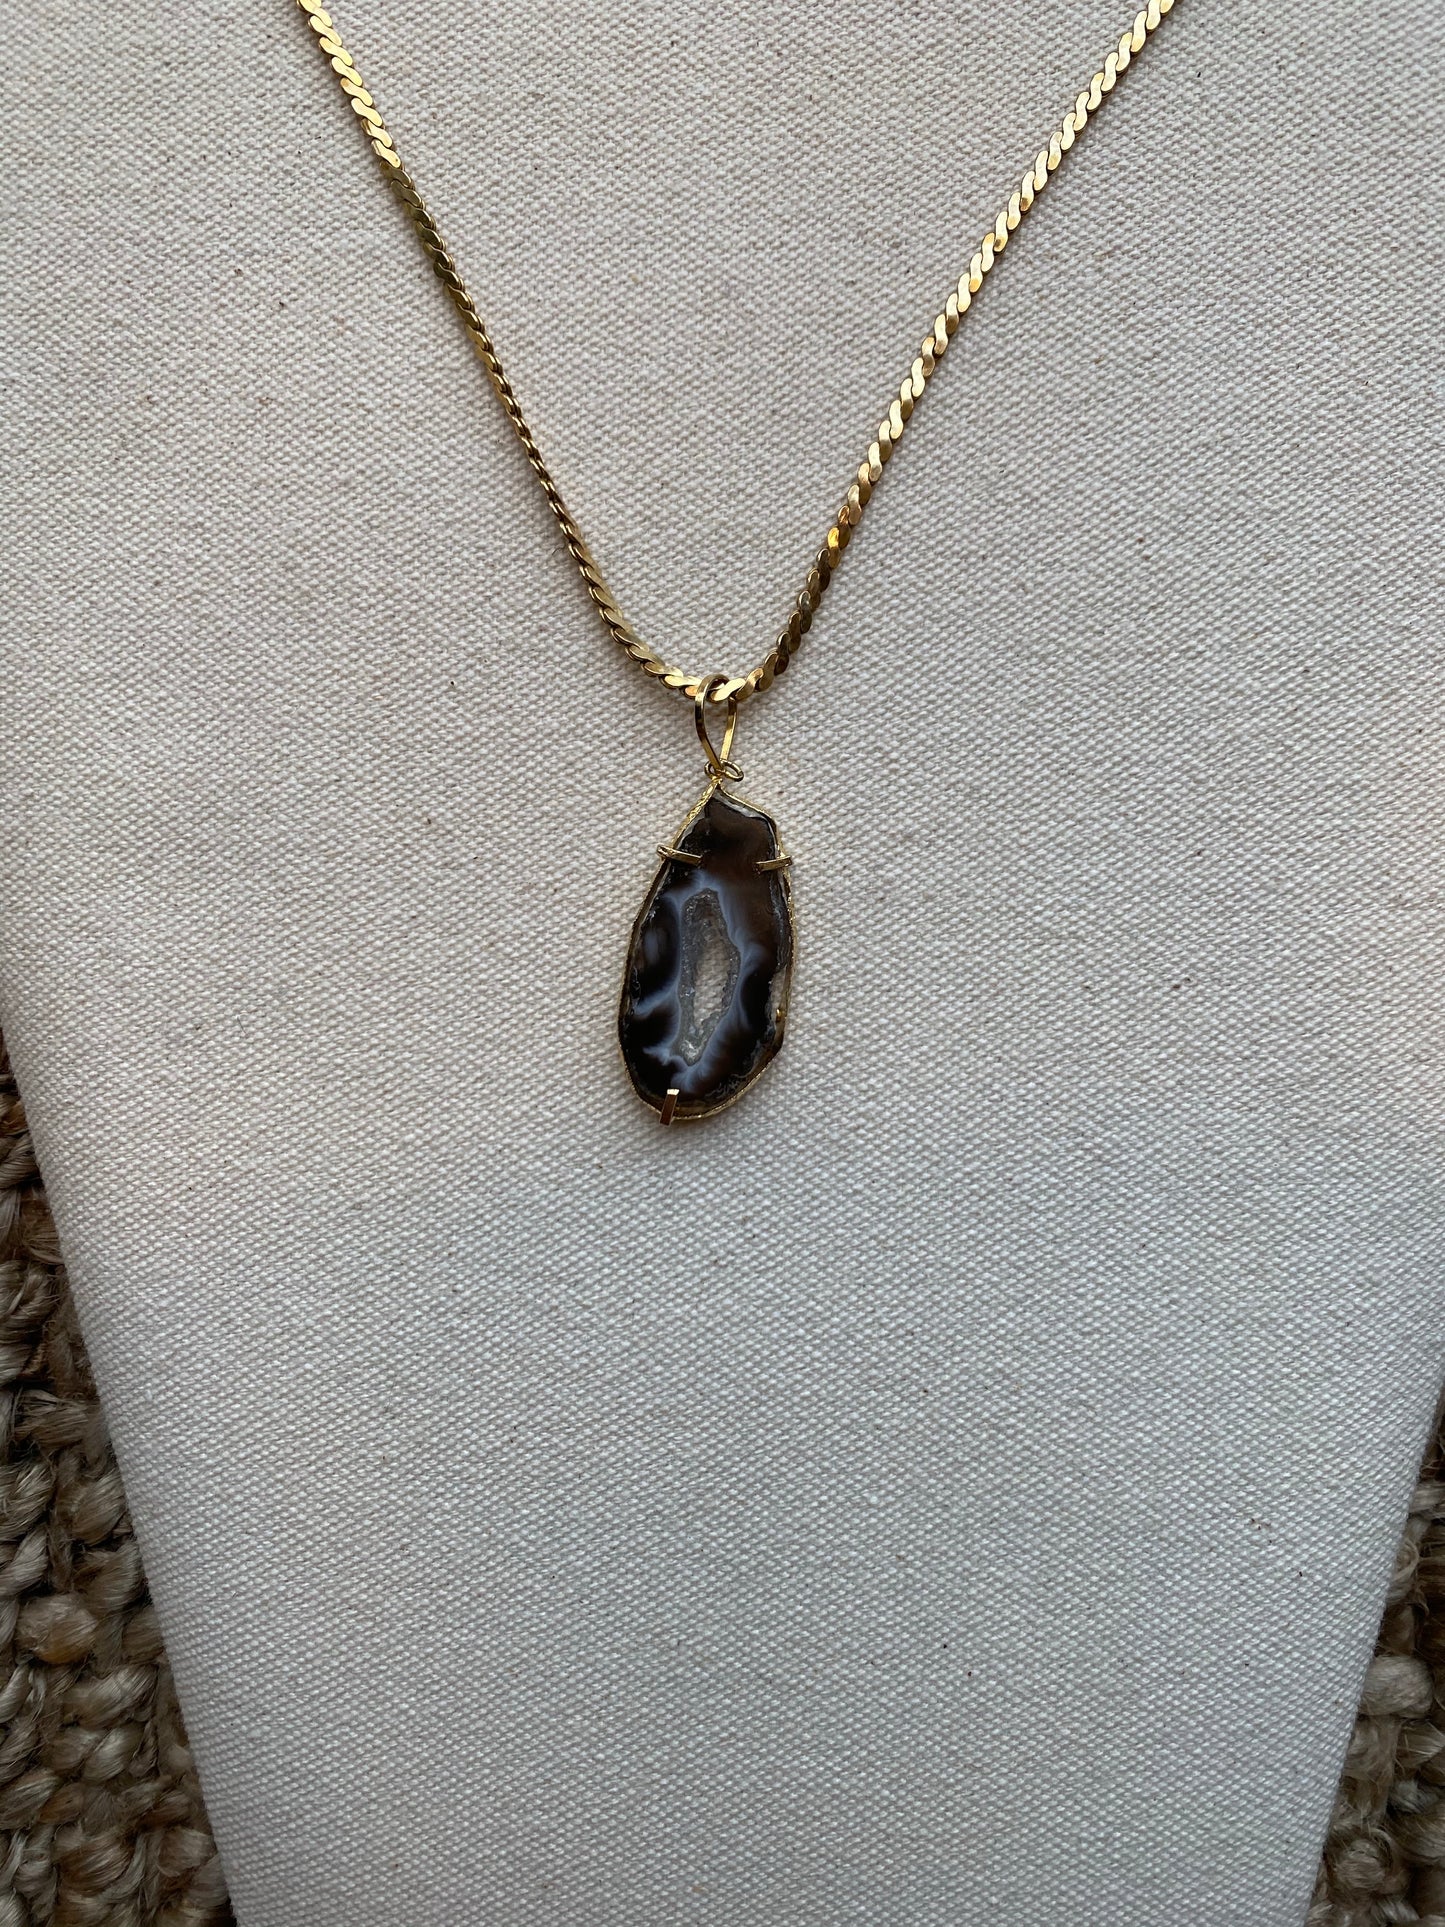 Banded Agate with Druzy Center Necklace